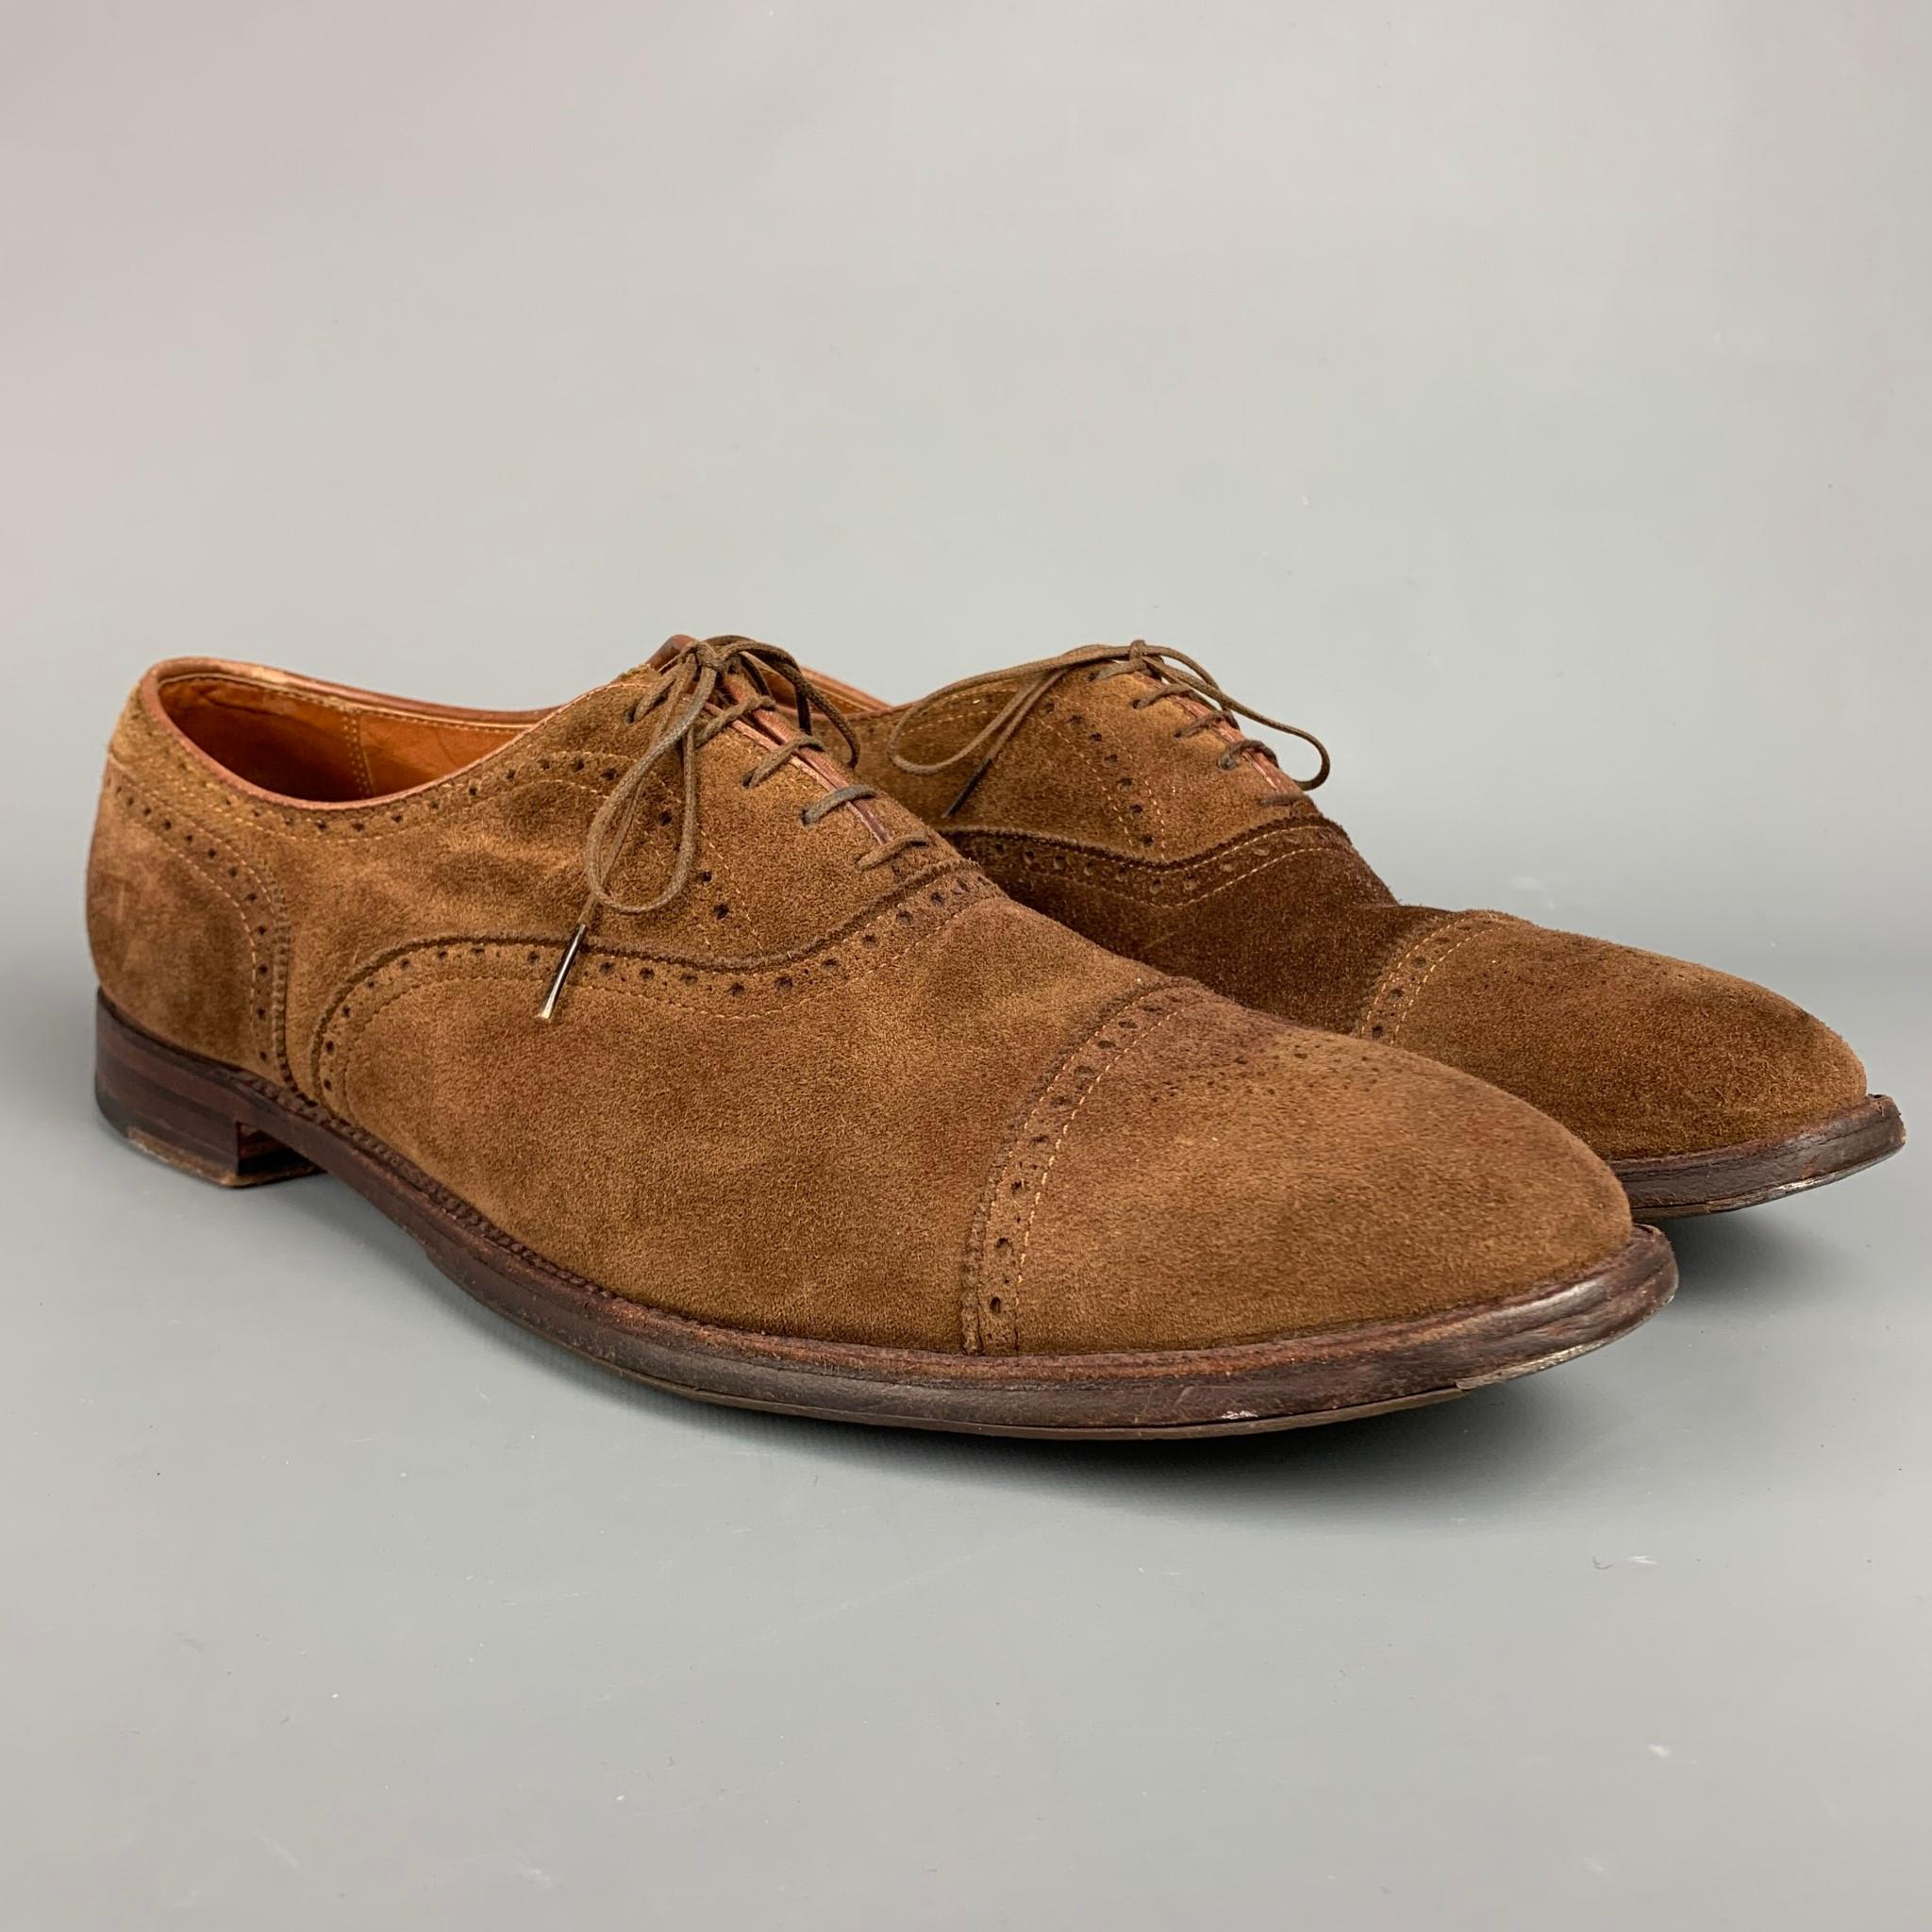 ALDEN lace up shoes comes in a brown perforated suede featuring a cap toe and a wooden sole. Comes with box. Made in England. 

Very Good Pre-Owned Condition.
Marked: 15 A / 51670F

Outsole: 13.5 in. x 4.5 in.